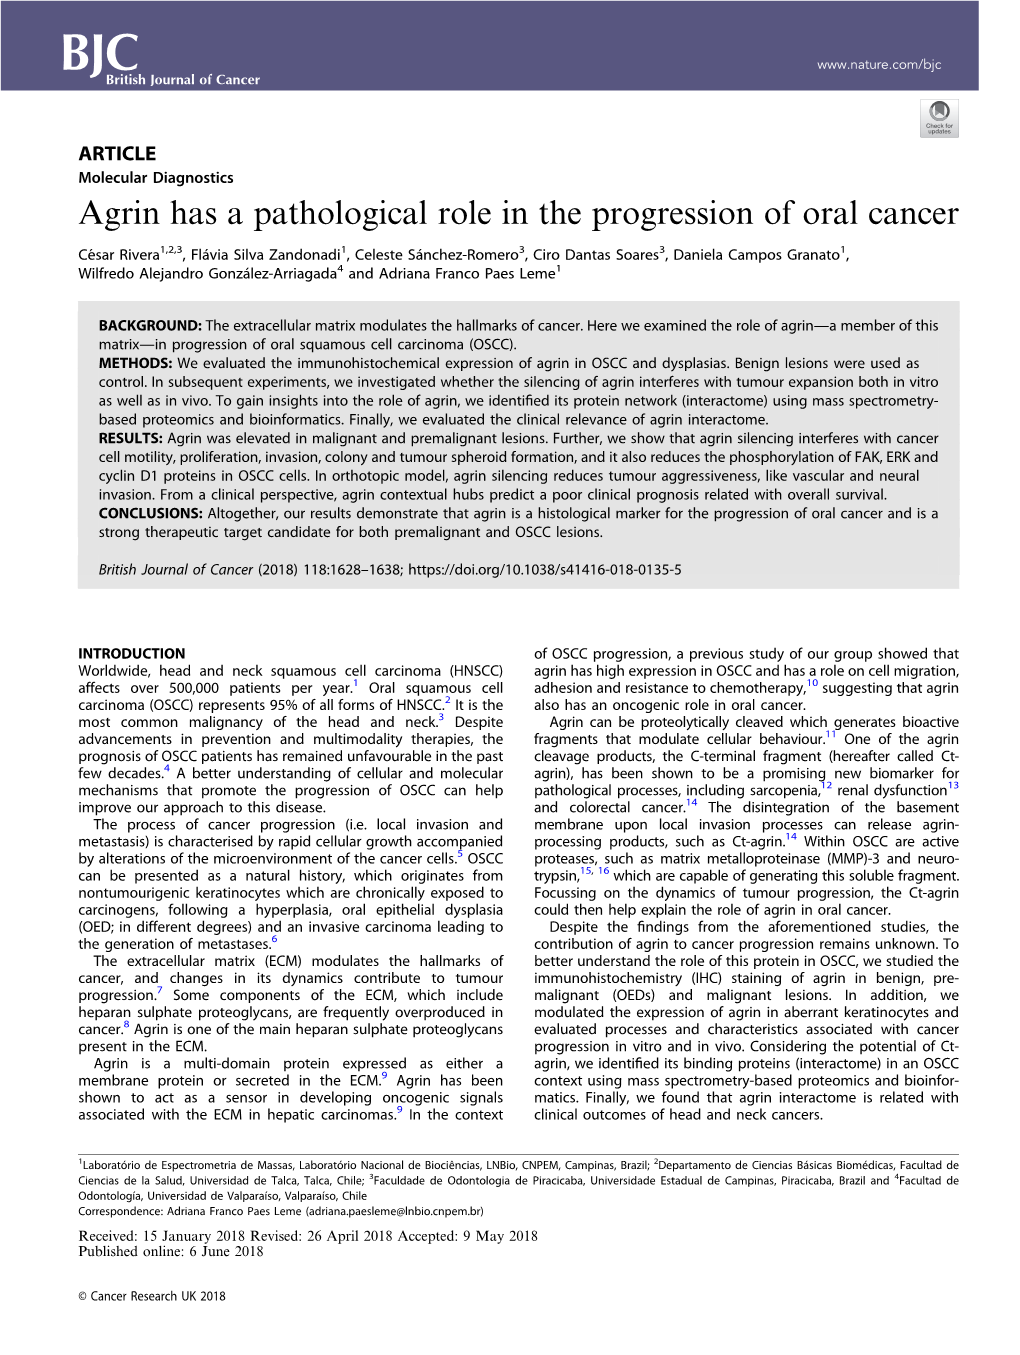 Agrin Has a Pathological Role in the Progression of Oral Cancer